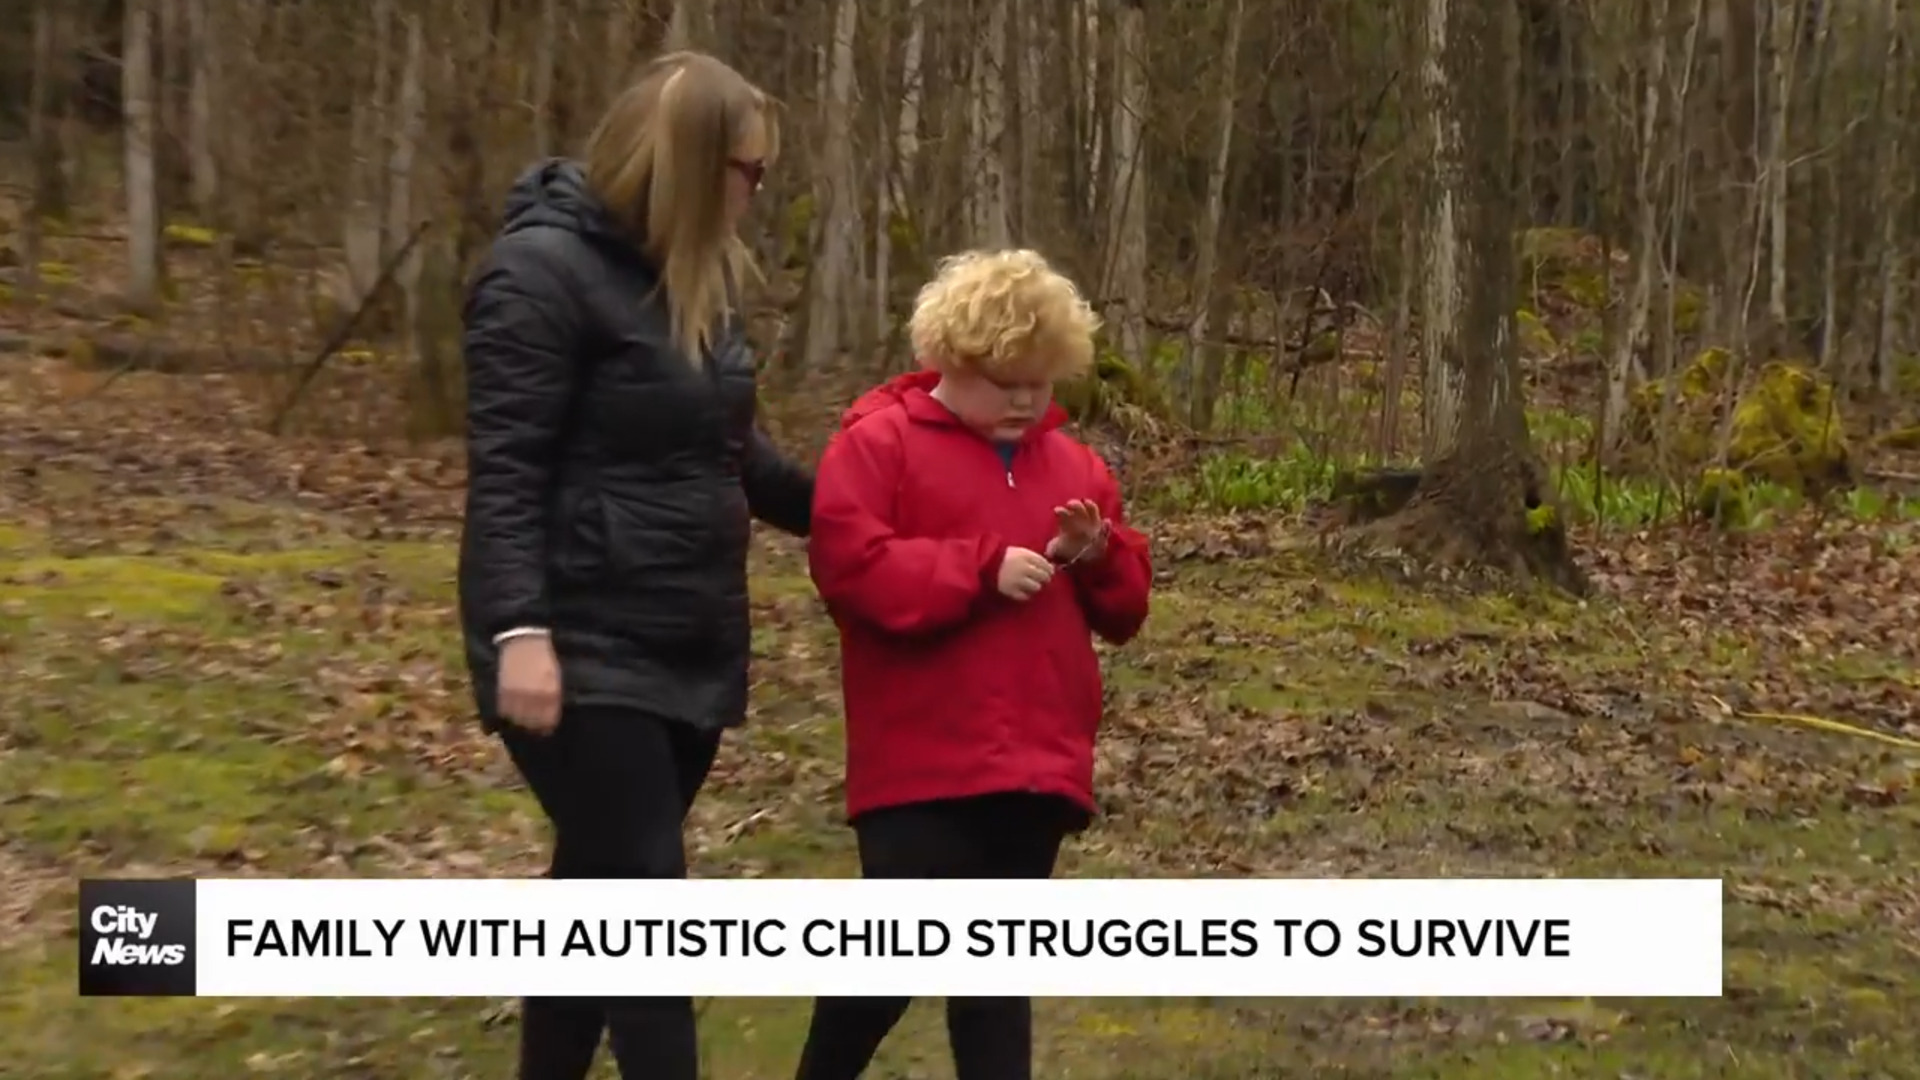 Mother of autistic child fears he will unintentionally kill her